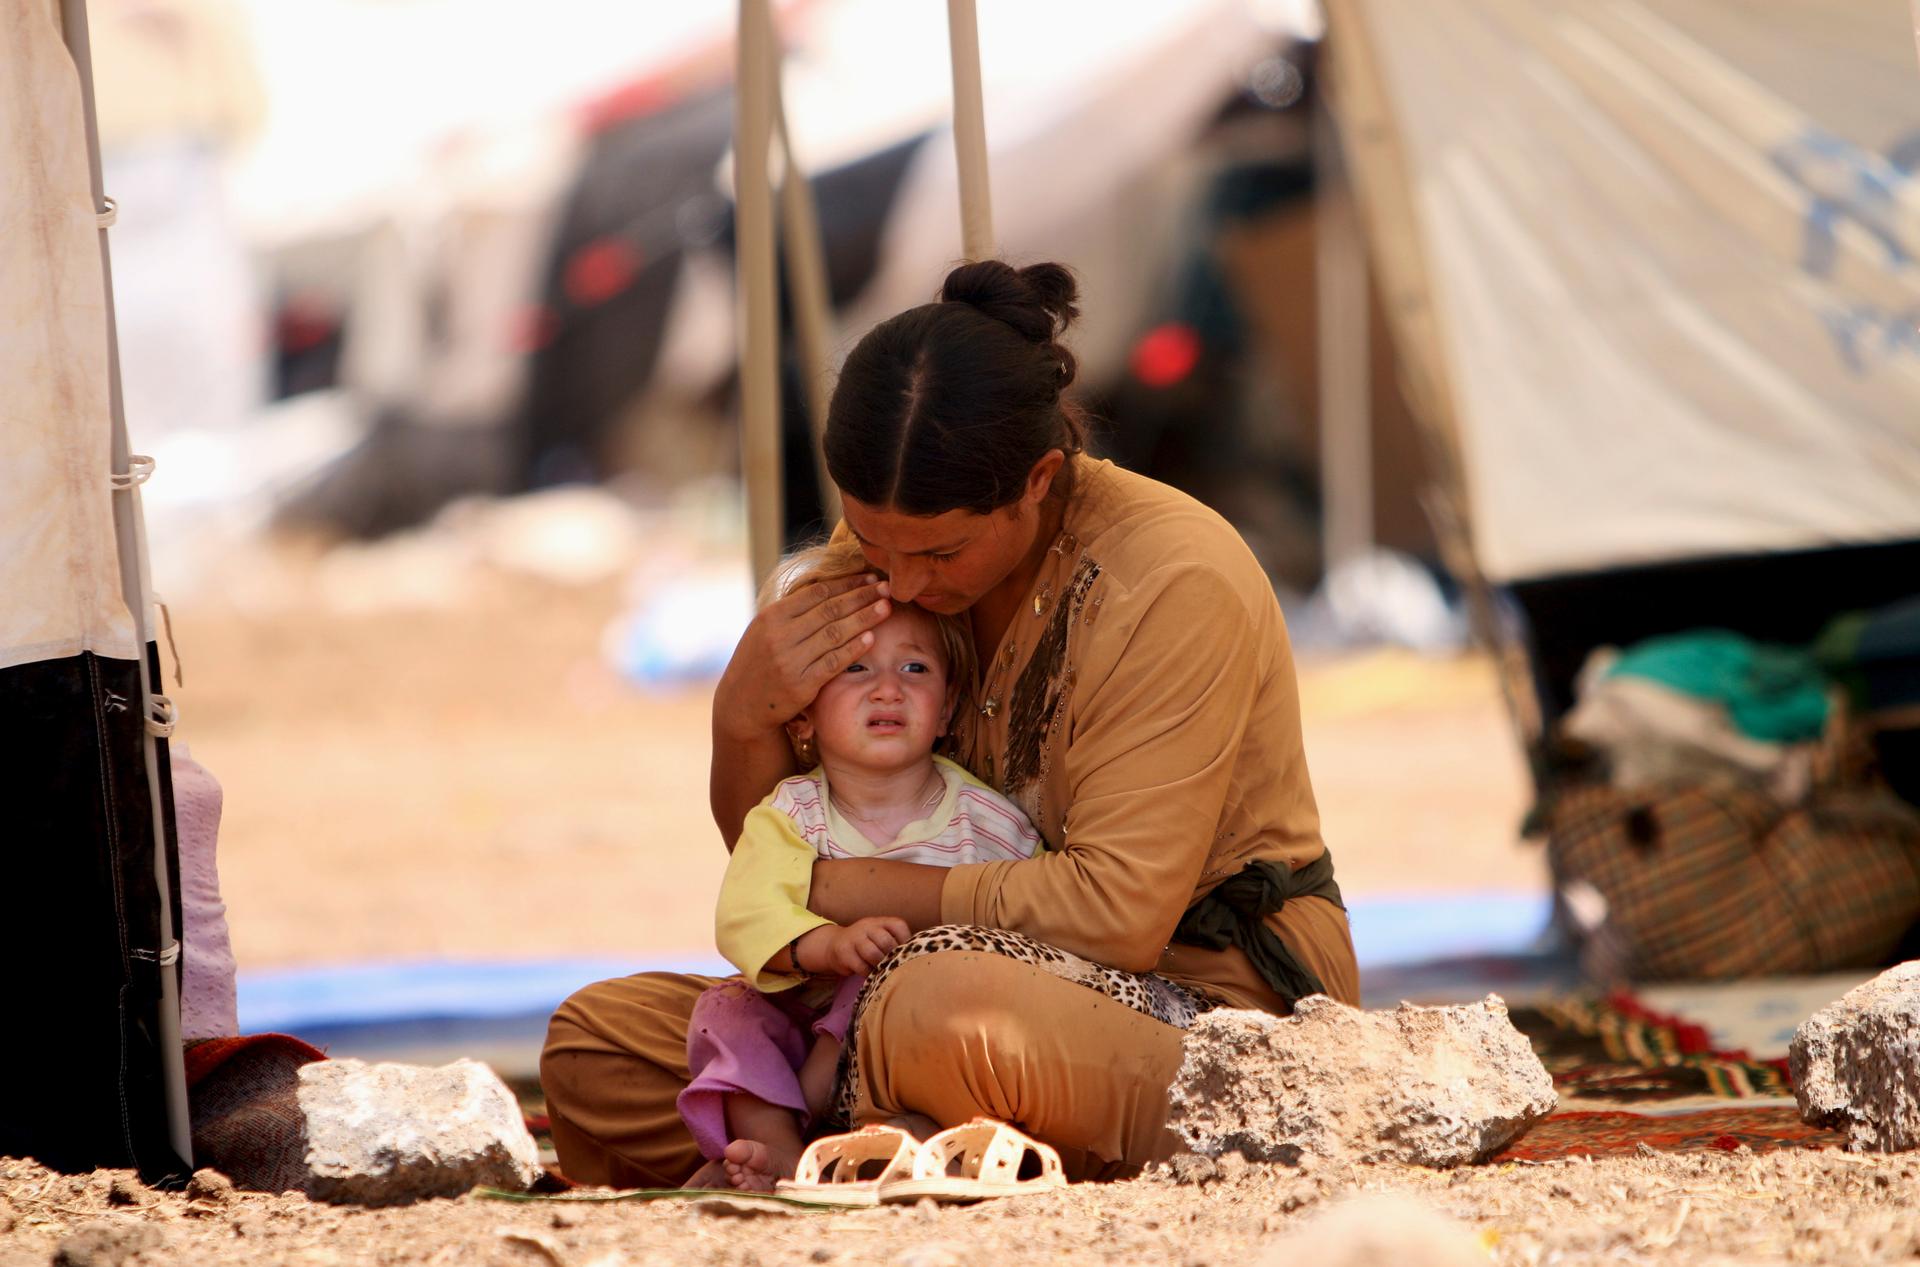 A refugee woman from the minority Yazidi sect, who fled the violence in the Iraqi town of Sinjar, sits with a child inside a tent at a refugee camp in north-eastern Syria. The Yazidis have been brutally persecuted by militants from the Islamic State, some